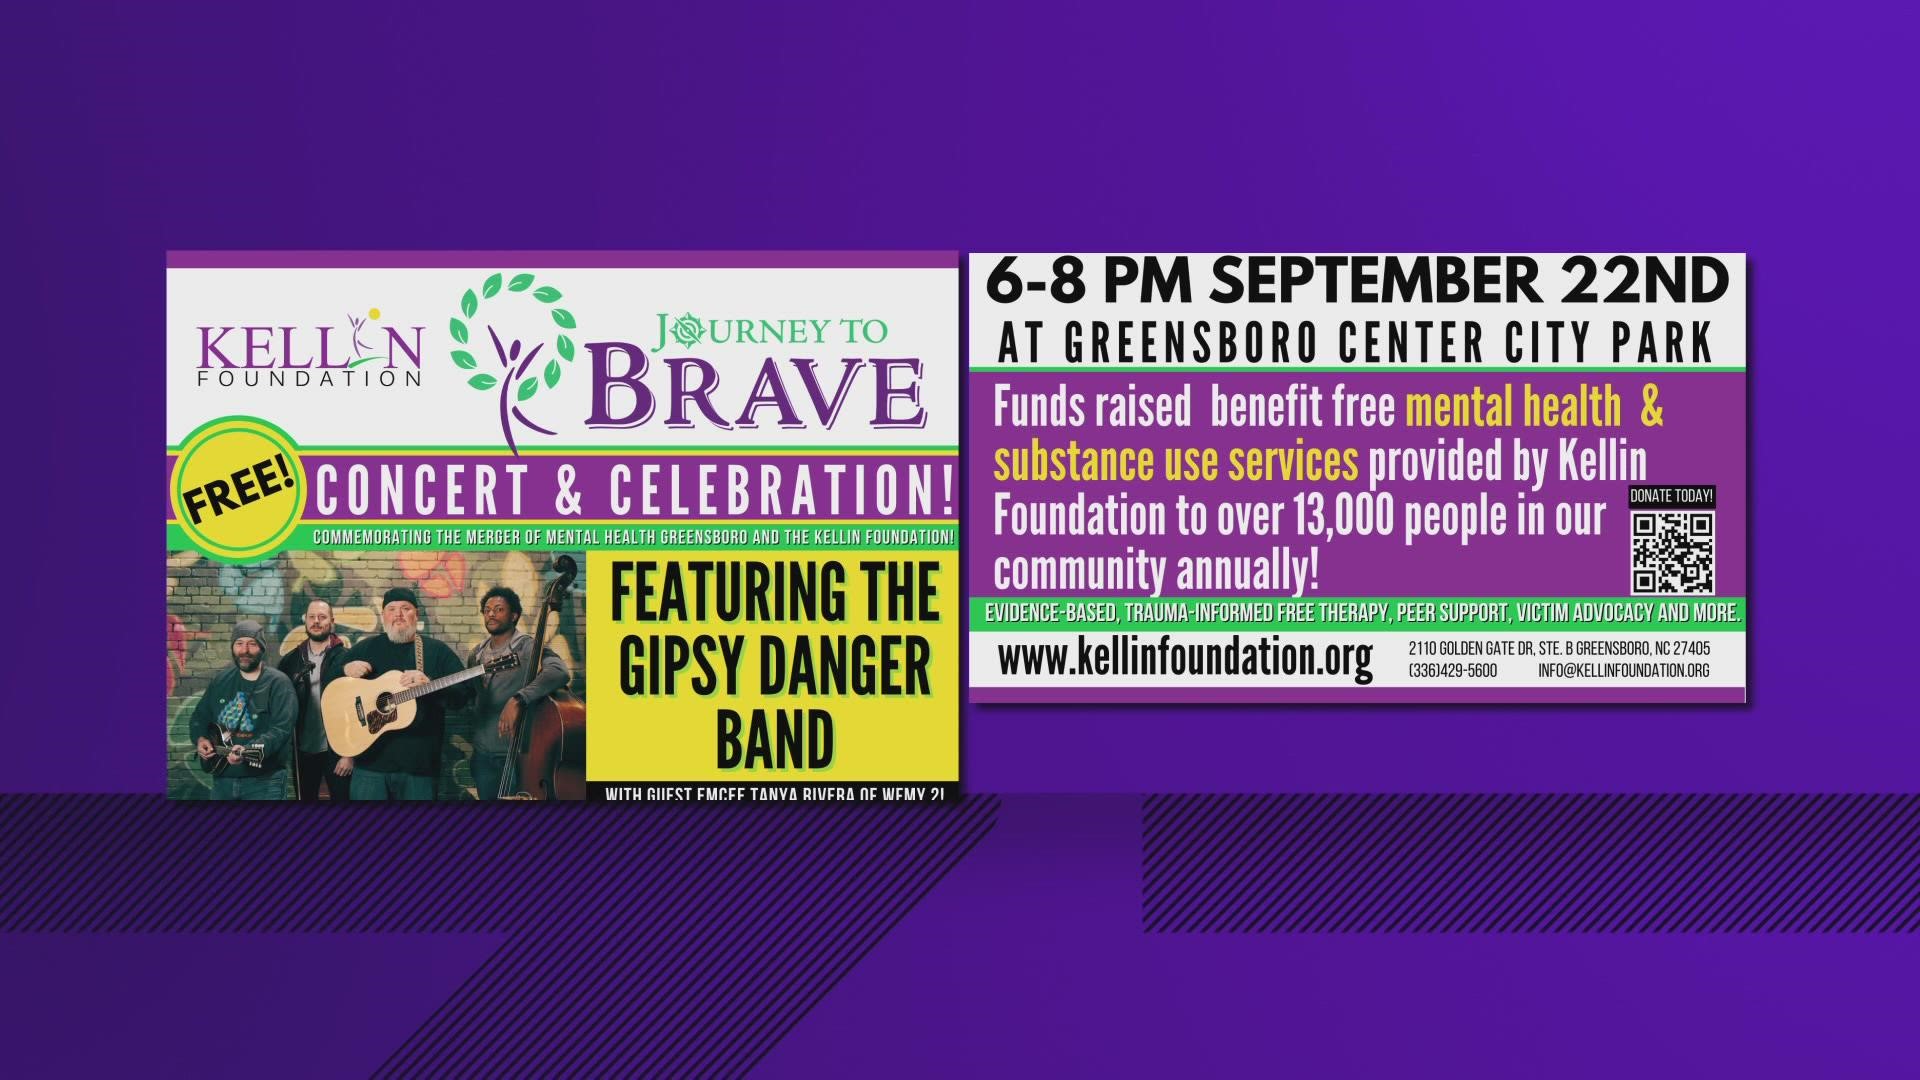 The free event will allow the non-profit to continue to provide free mental health services to people in Guilford County.